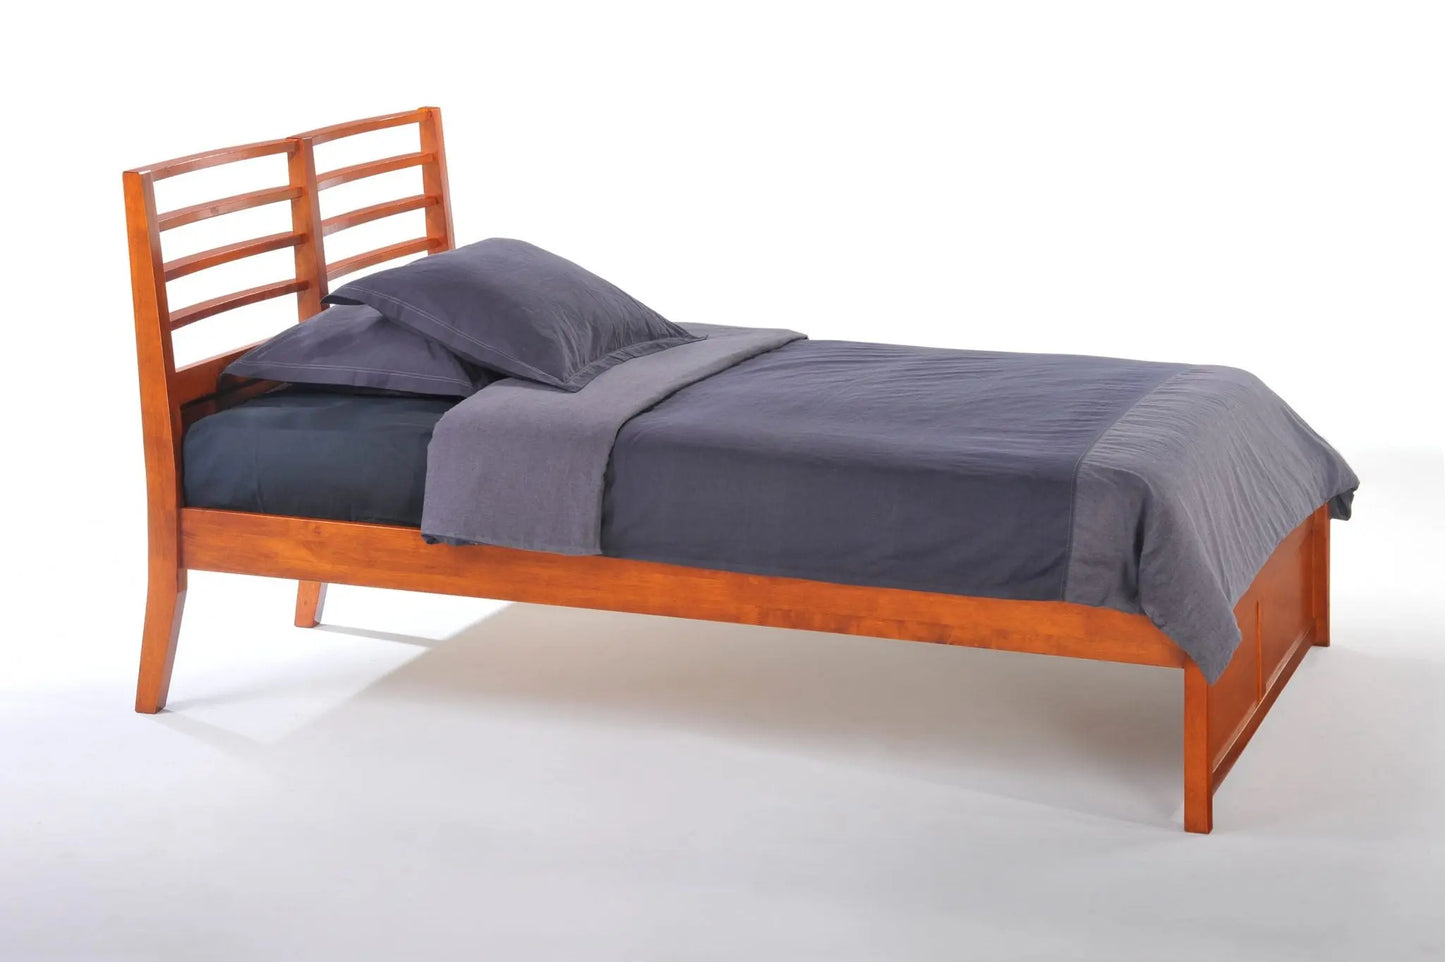 JASMINE BED night and day furniture